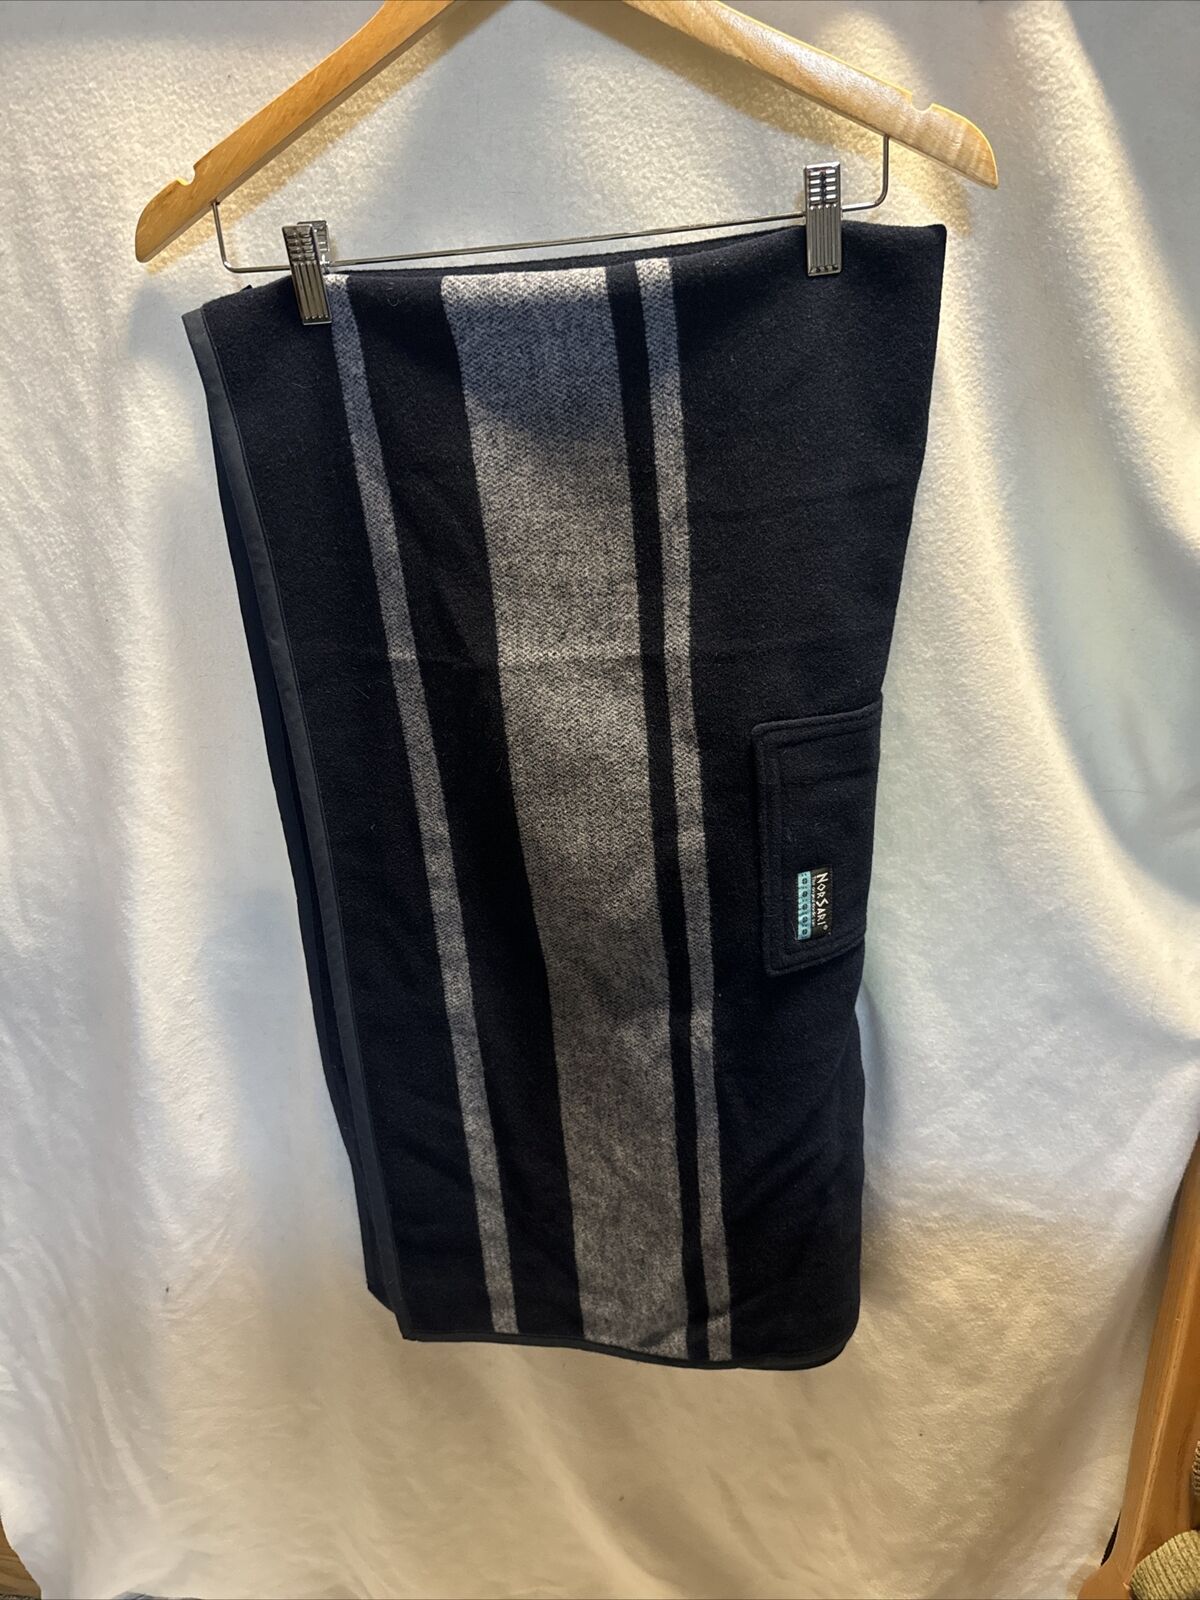 NorSari Blanket and Wearable Wrap, The Ivy League Stripe, Navy & Grey Large